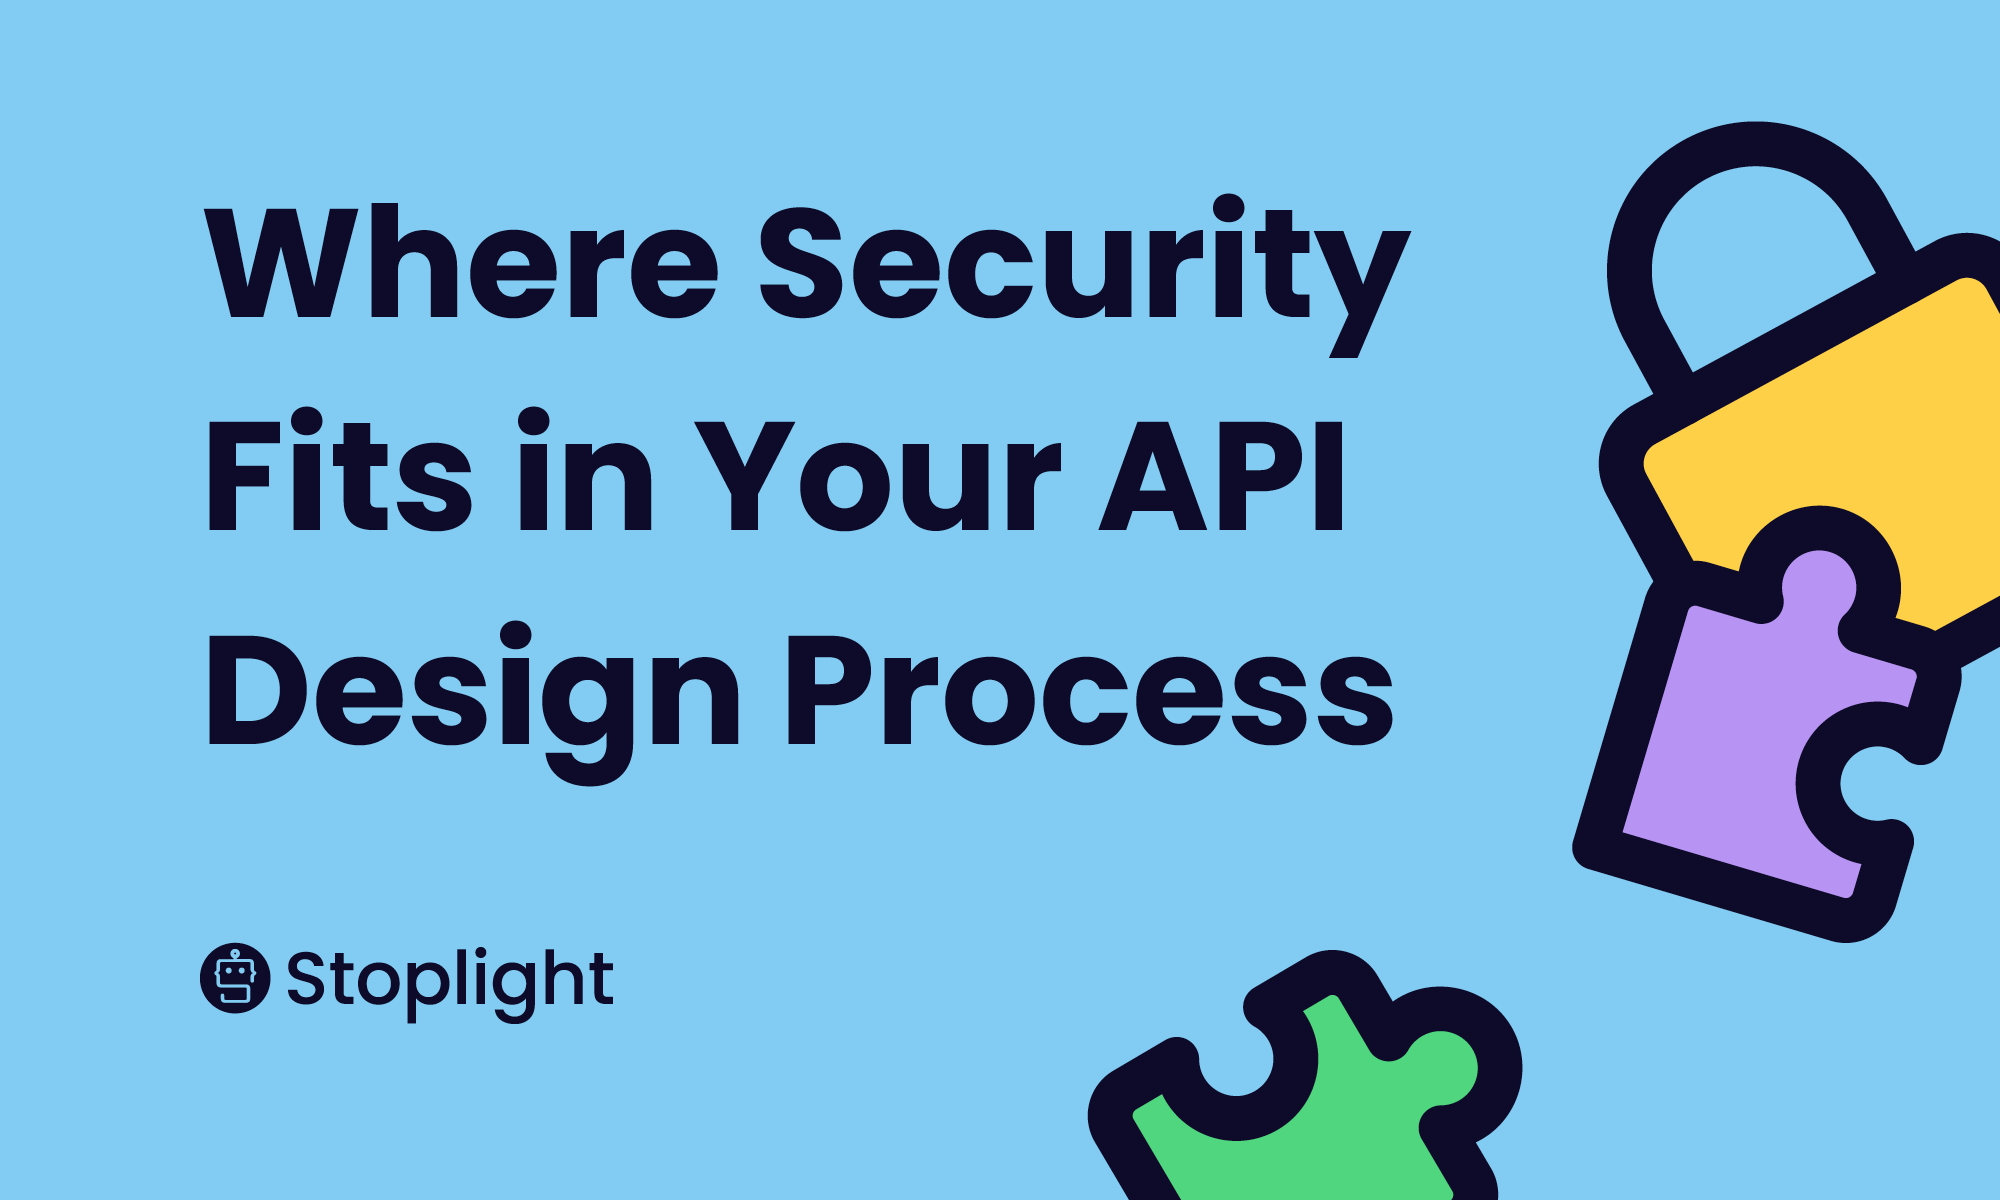 Where Security Fits in Your API Design Process